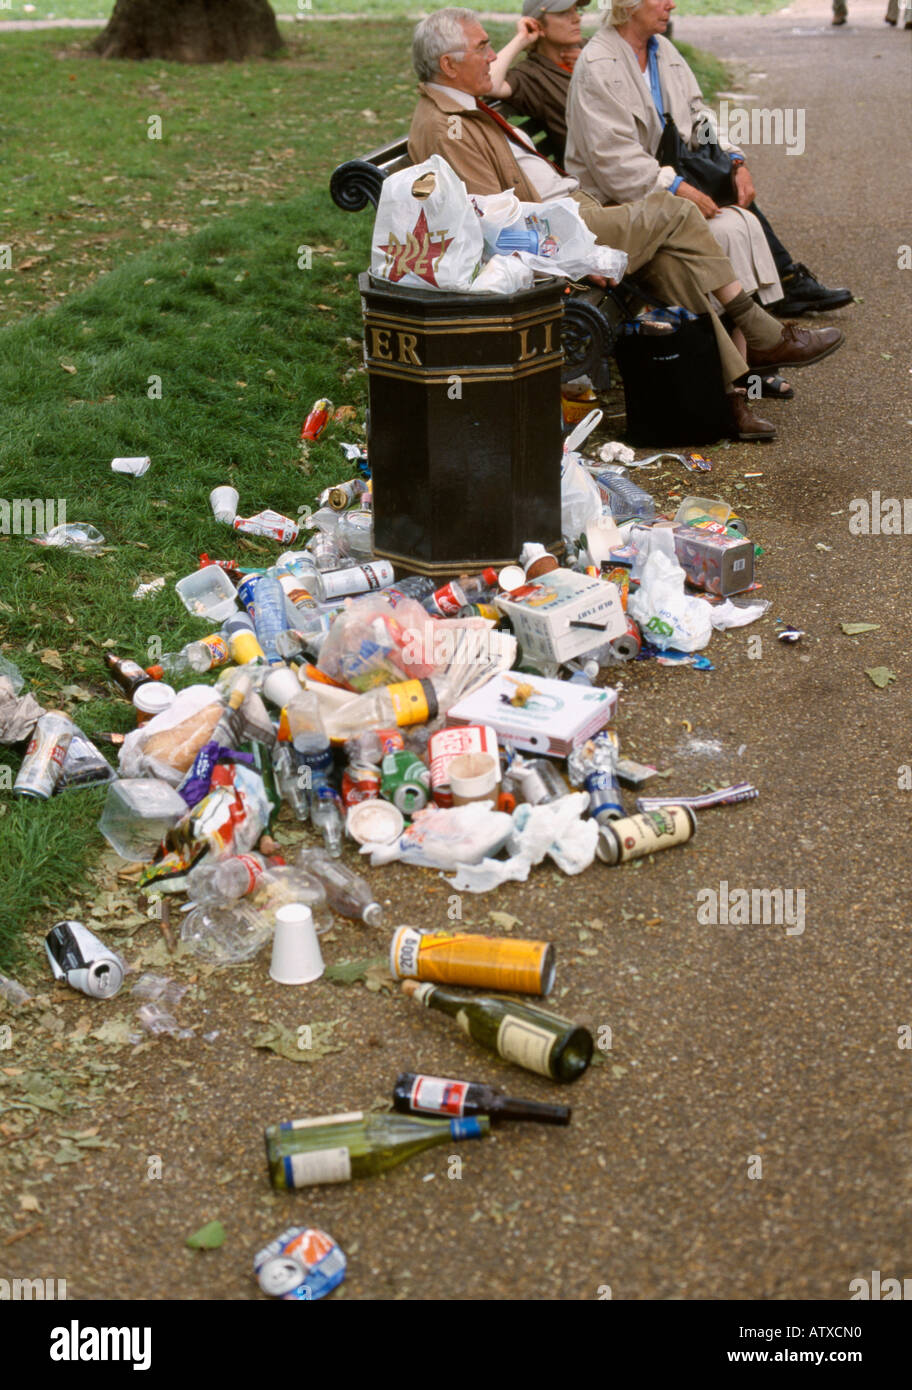 a rubbish bin overflows with garbage in Green Park, London Stock Photo